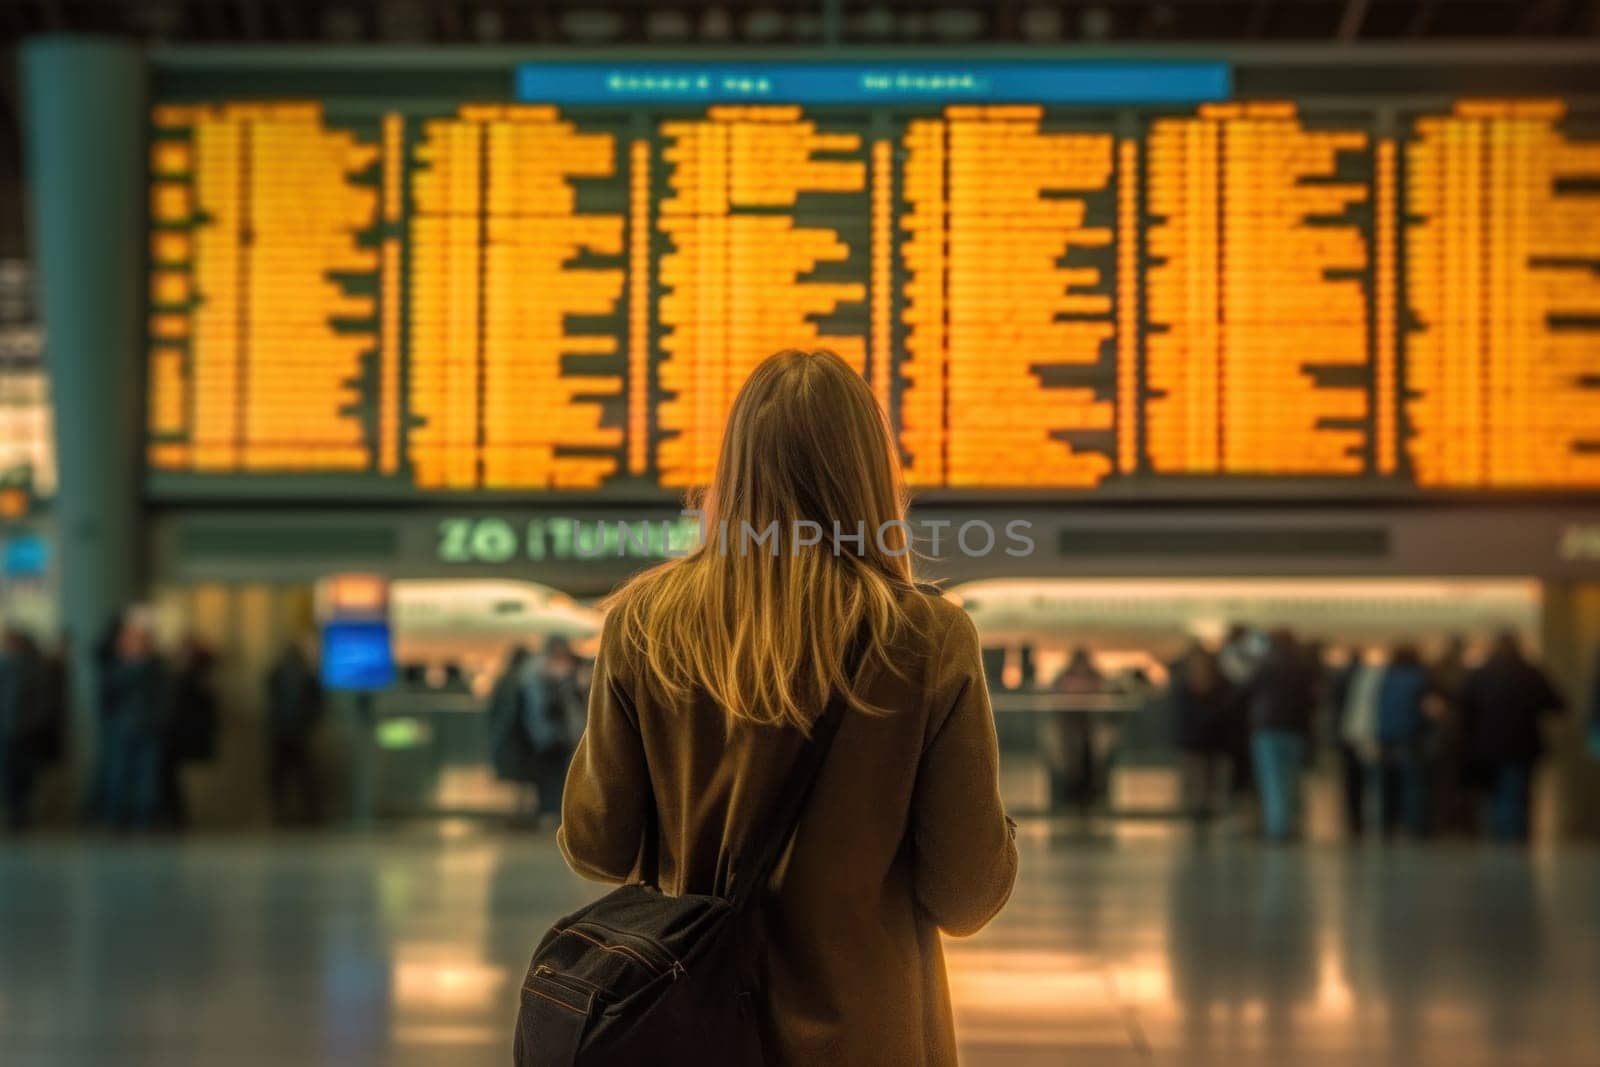 Photo of a people in The Airport In Front Of The Flight Information Display.